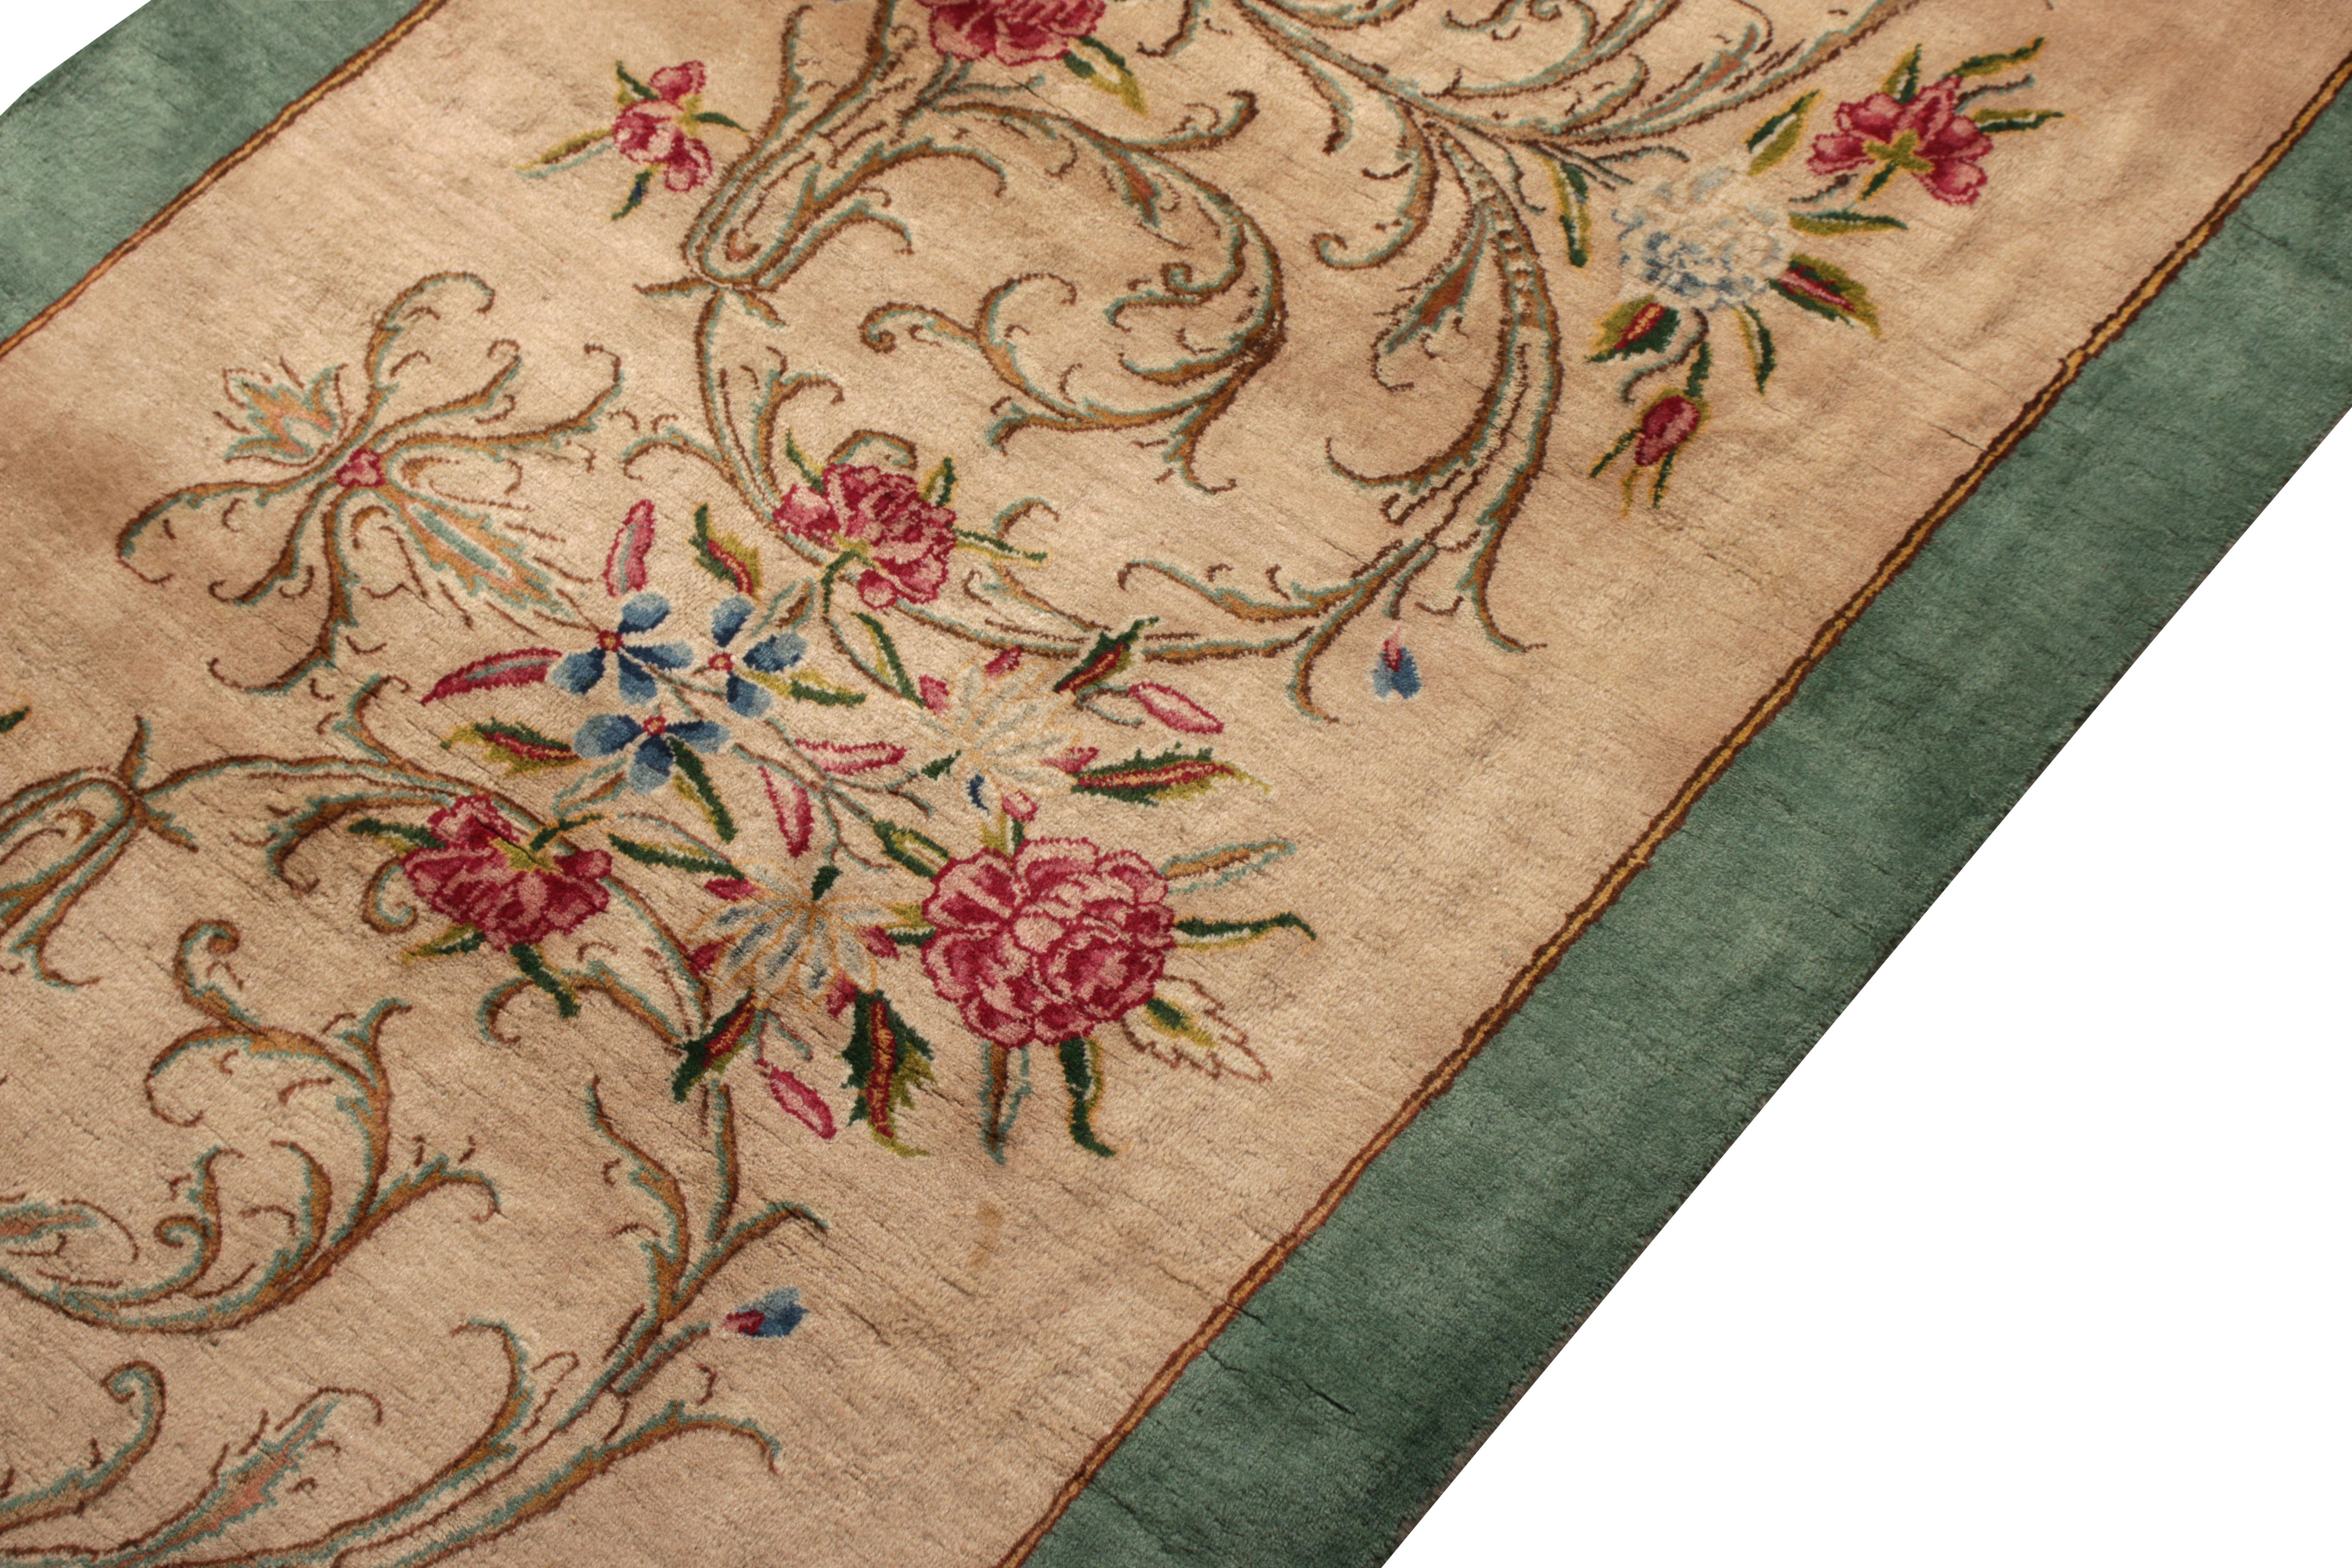 Hand-Knotted Vintage Signature Twin Persian Runners in Beige with Red & Green Floral Patterns For Sale